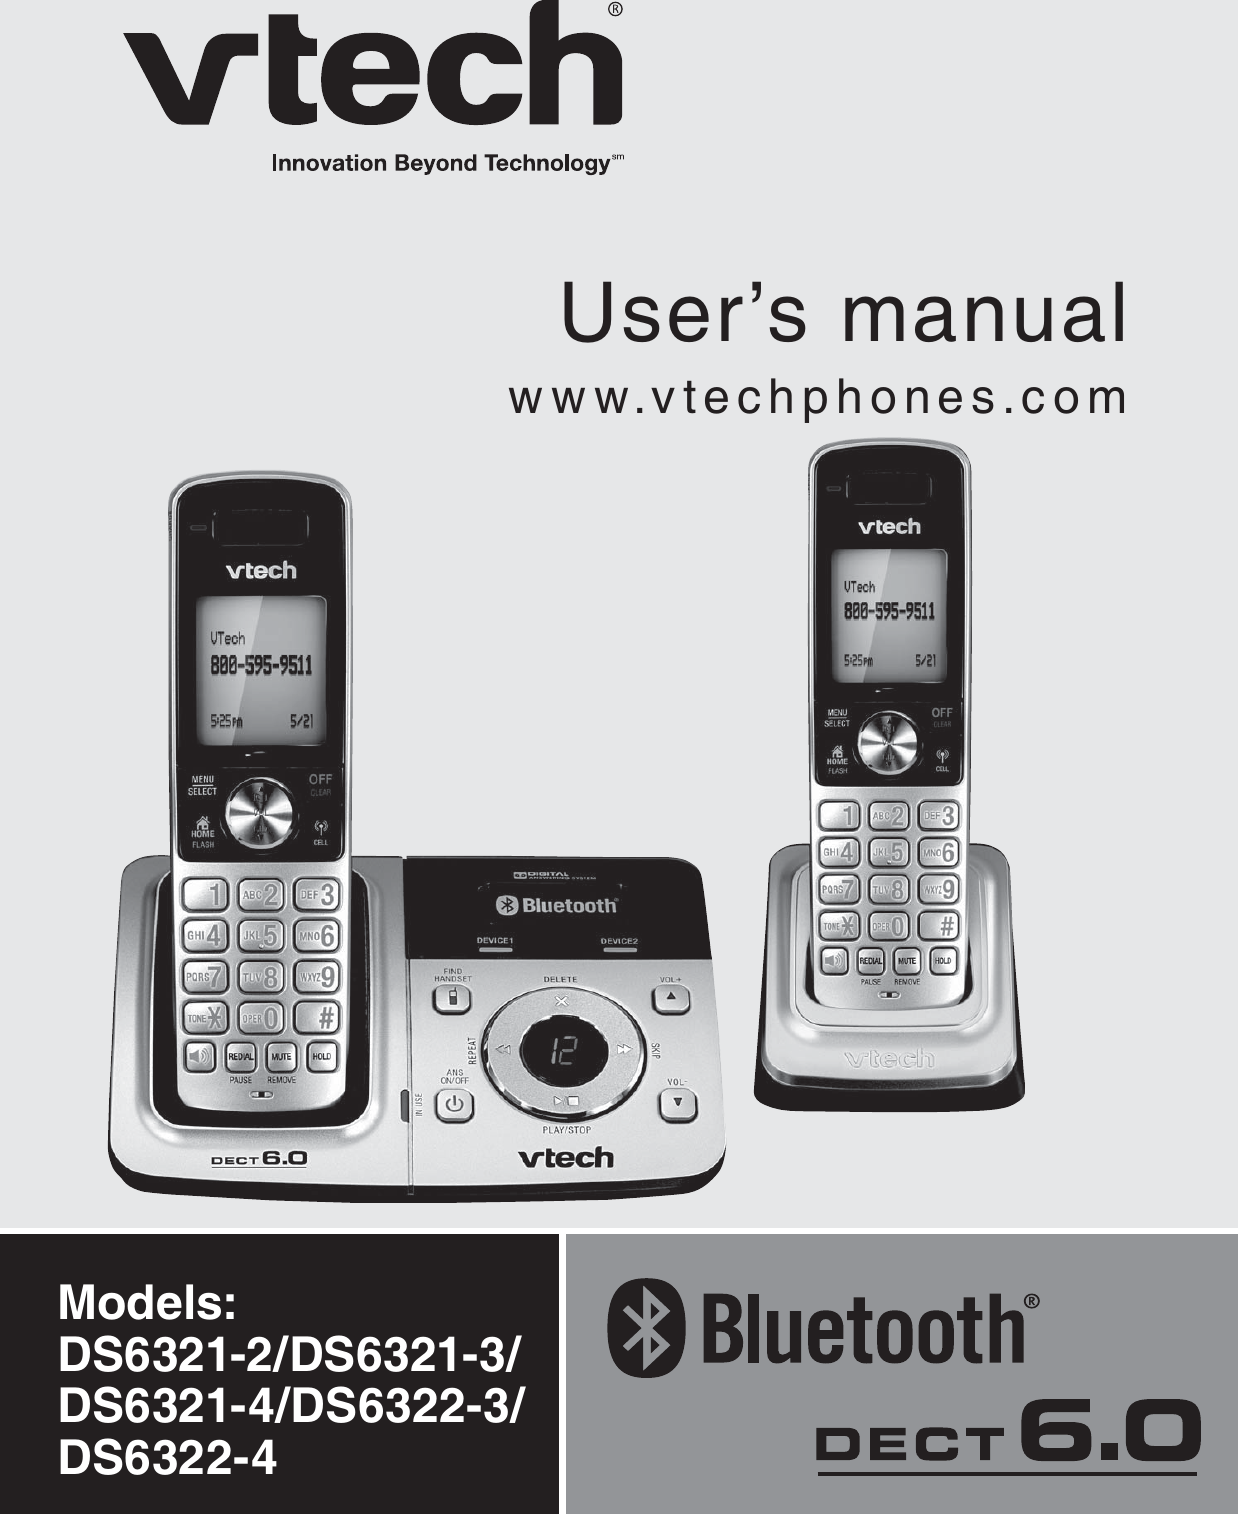 User’s manualwww.vtechphones.comModels: DS6321-2/DS6321-3/DS6321-4/DS6322-3/DS6322-4